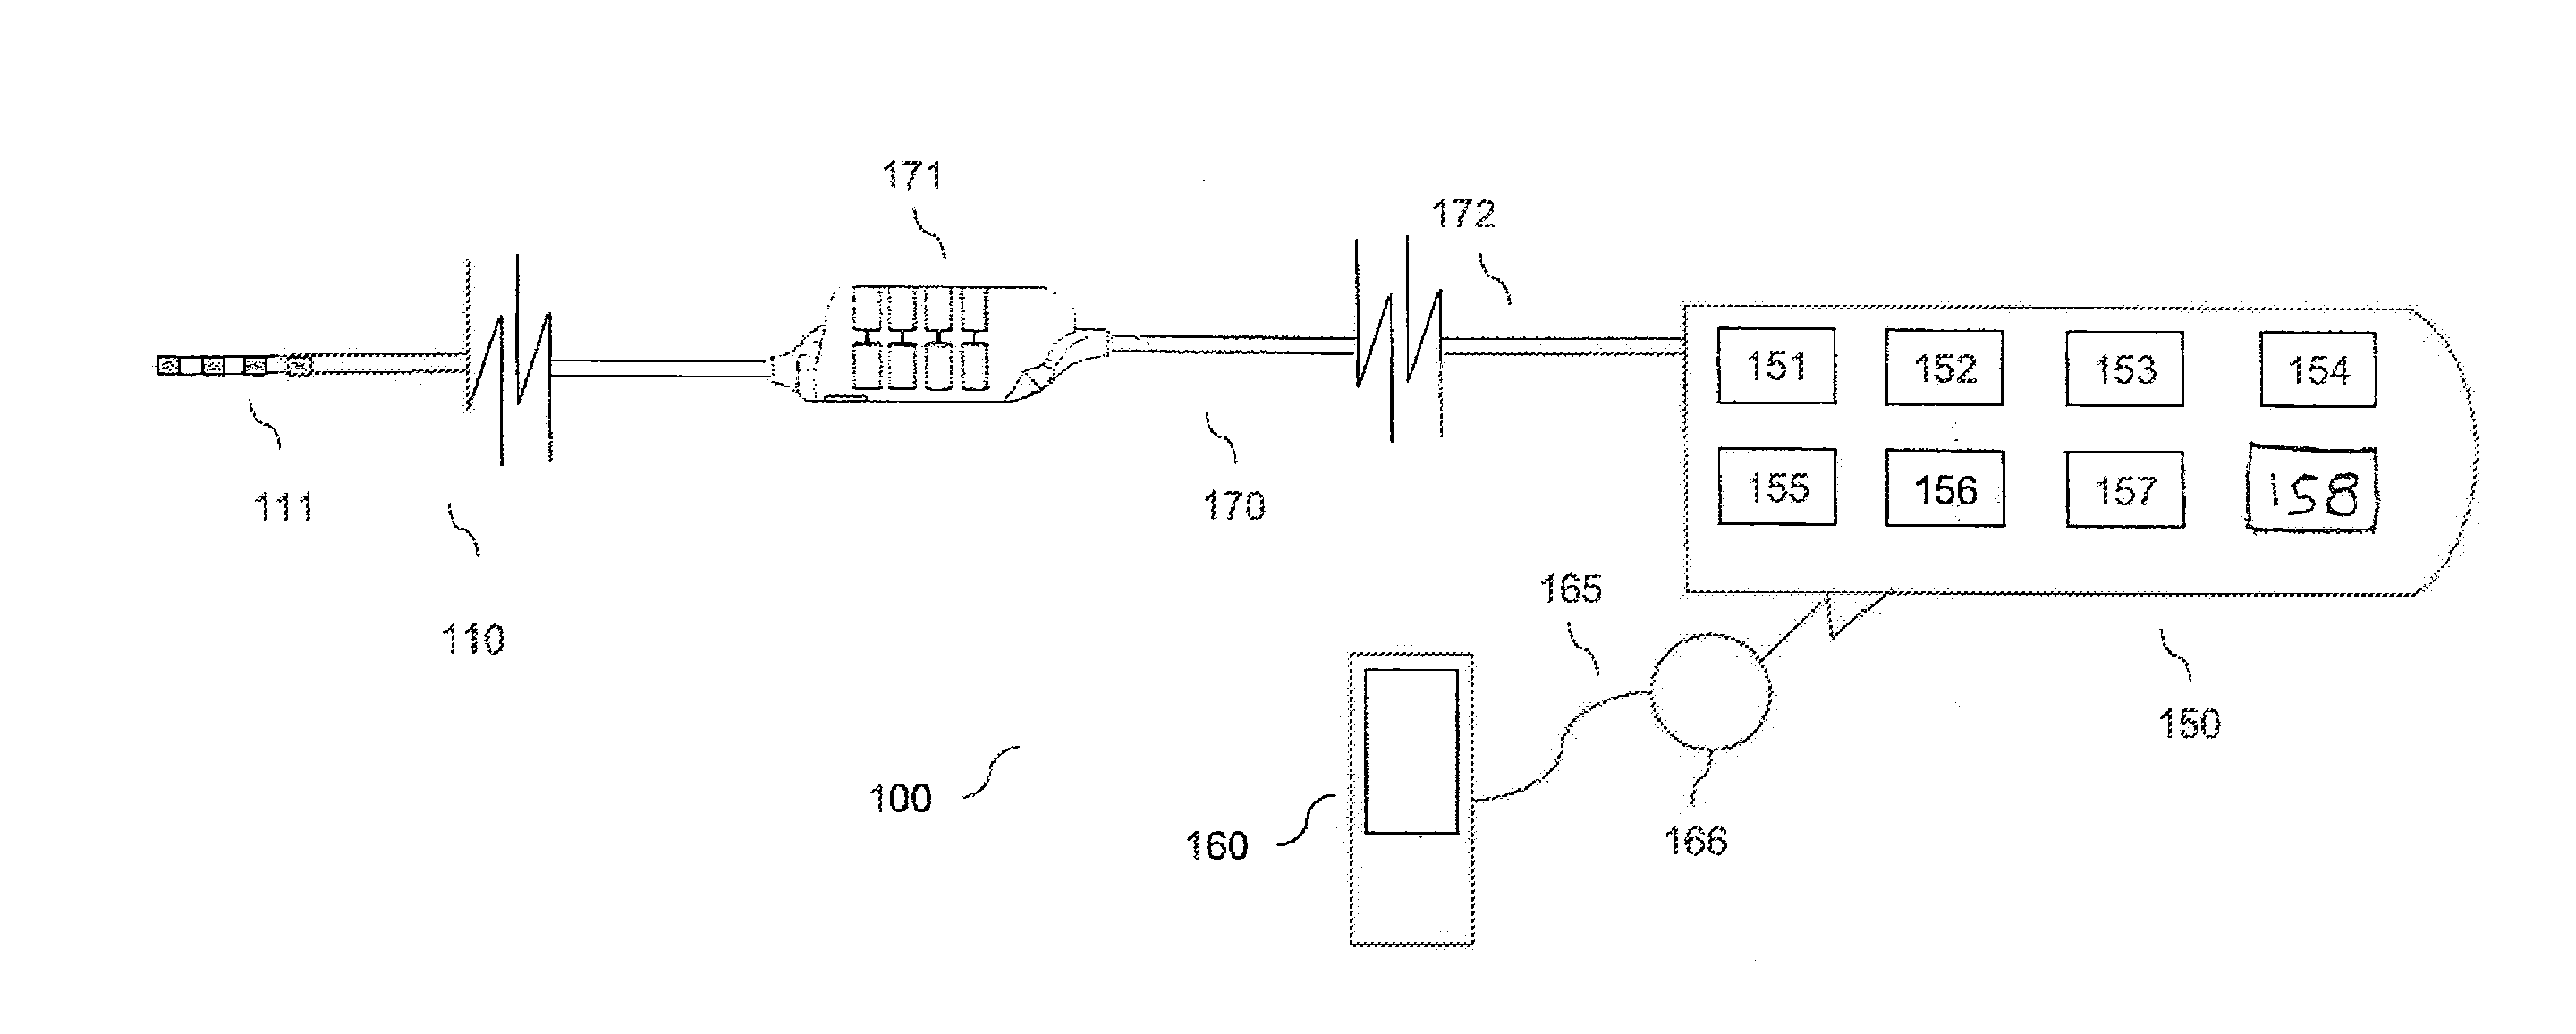 Method and system for non-linear feedback control of spinal cord stimulation